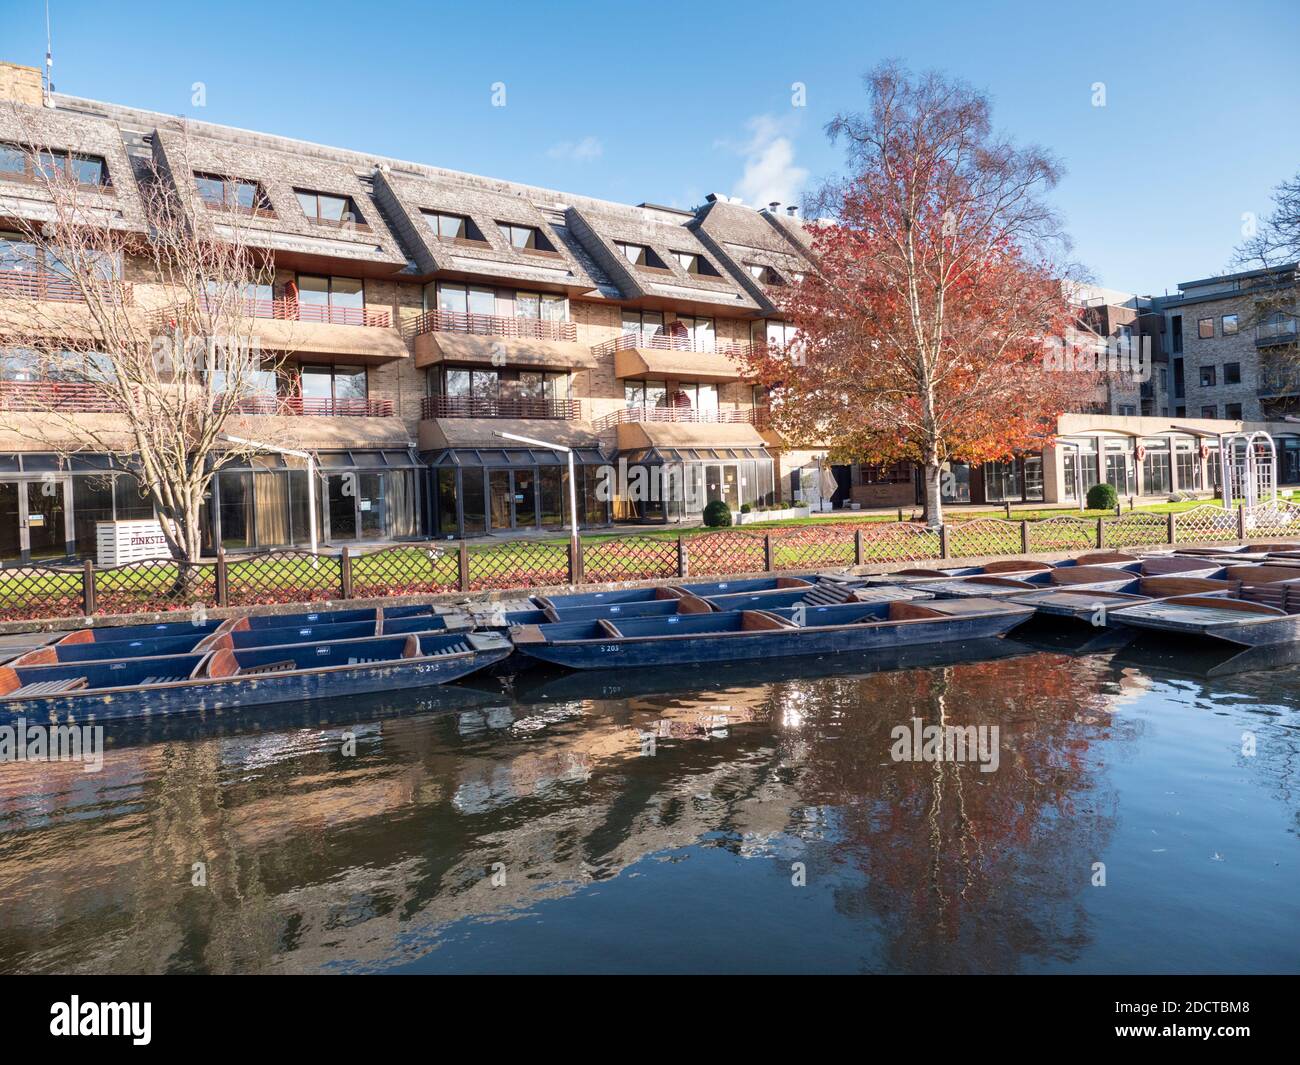 The Doubletree Hotel Cambridge UK on the banks of the River Cam Stock Photo